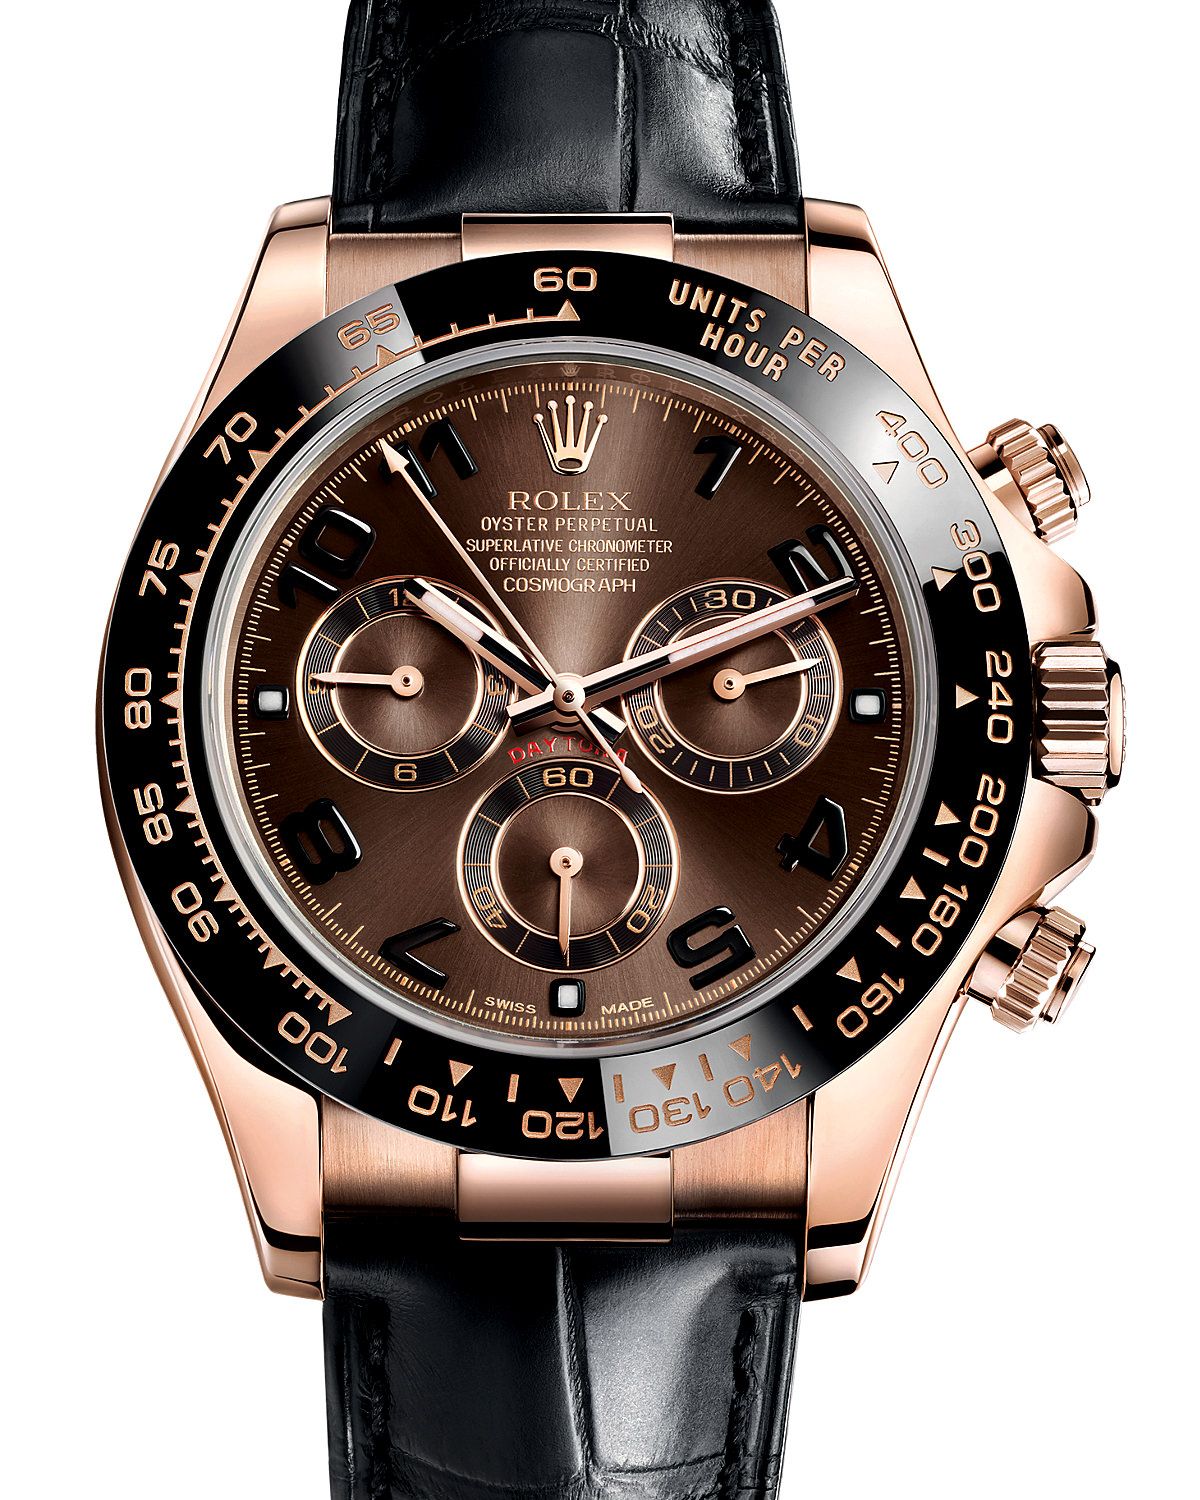 rolex oyster perpetual superlative chronometer officially certified cosmograph price in india